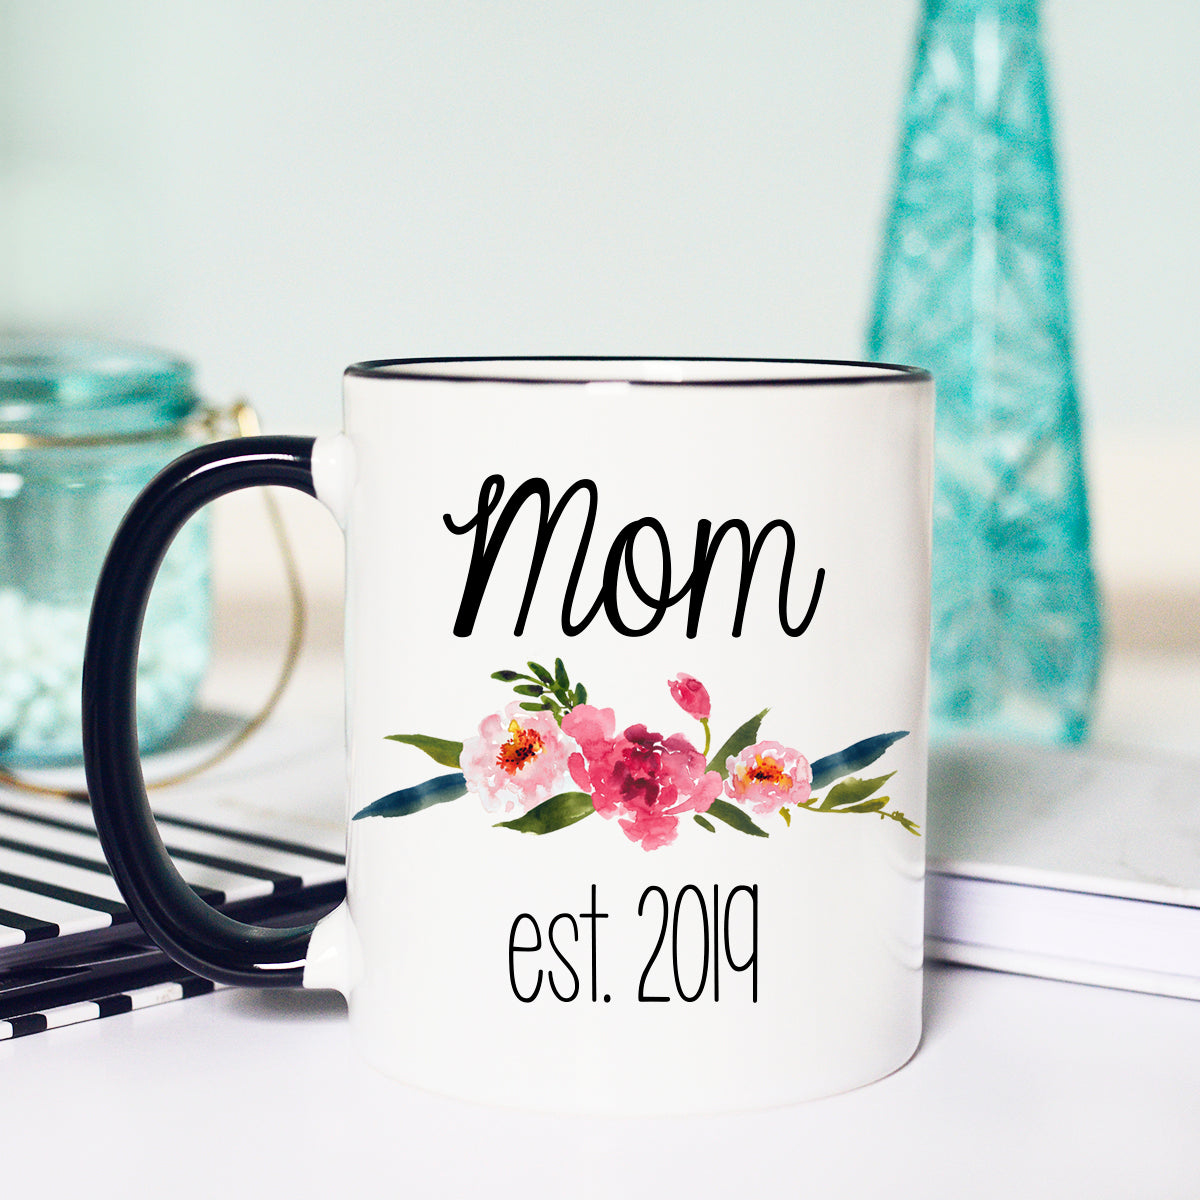 Personalized New Mom Mug, Custom New Mom Gift, Promoted To Human Mom Mug,  Baby Shower Gifts, Baby Announcement Gift For New Mom, Mom Gifts